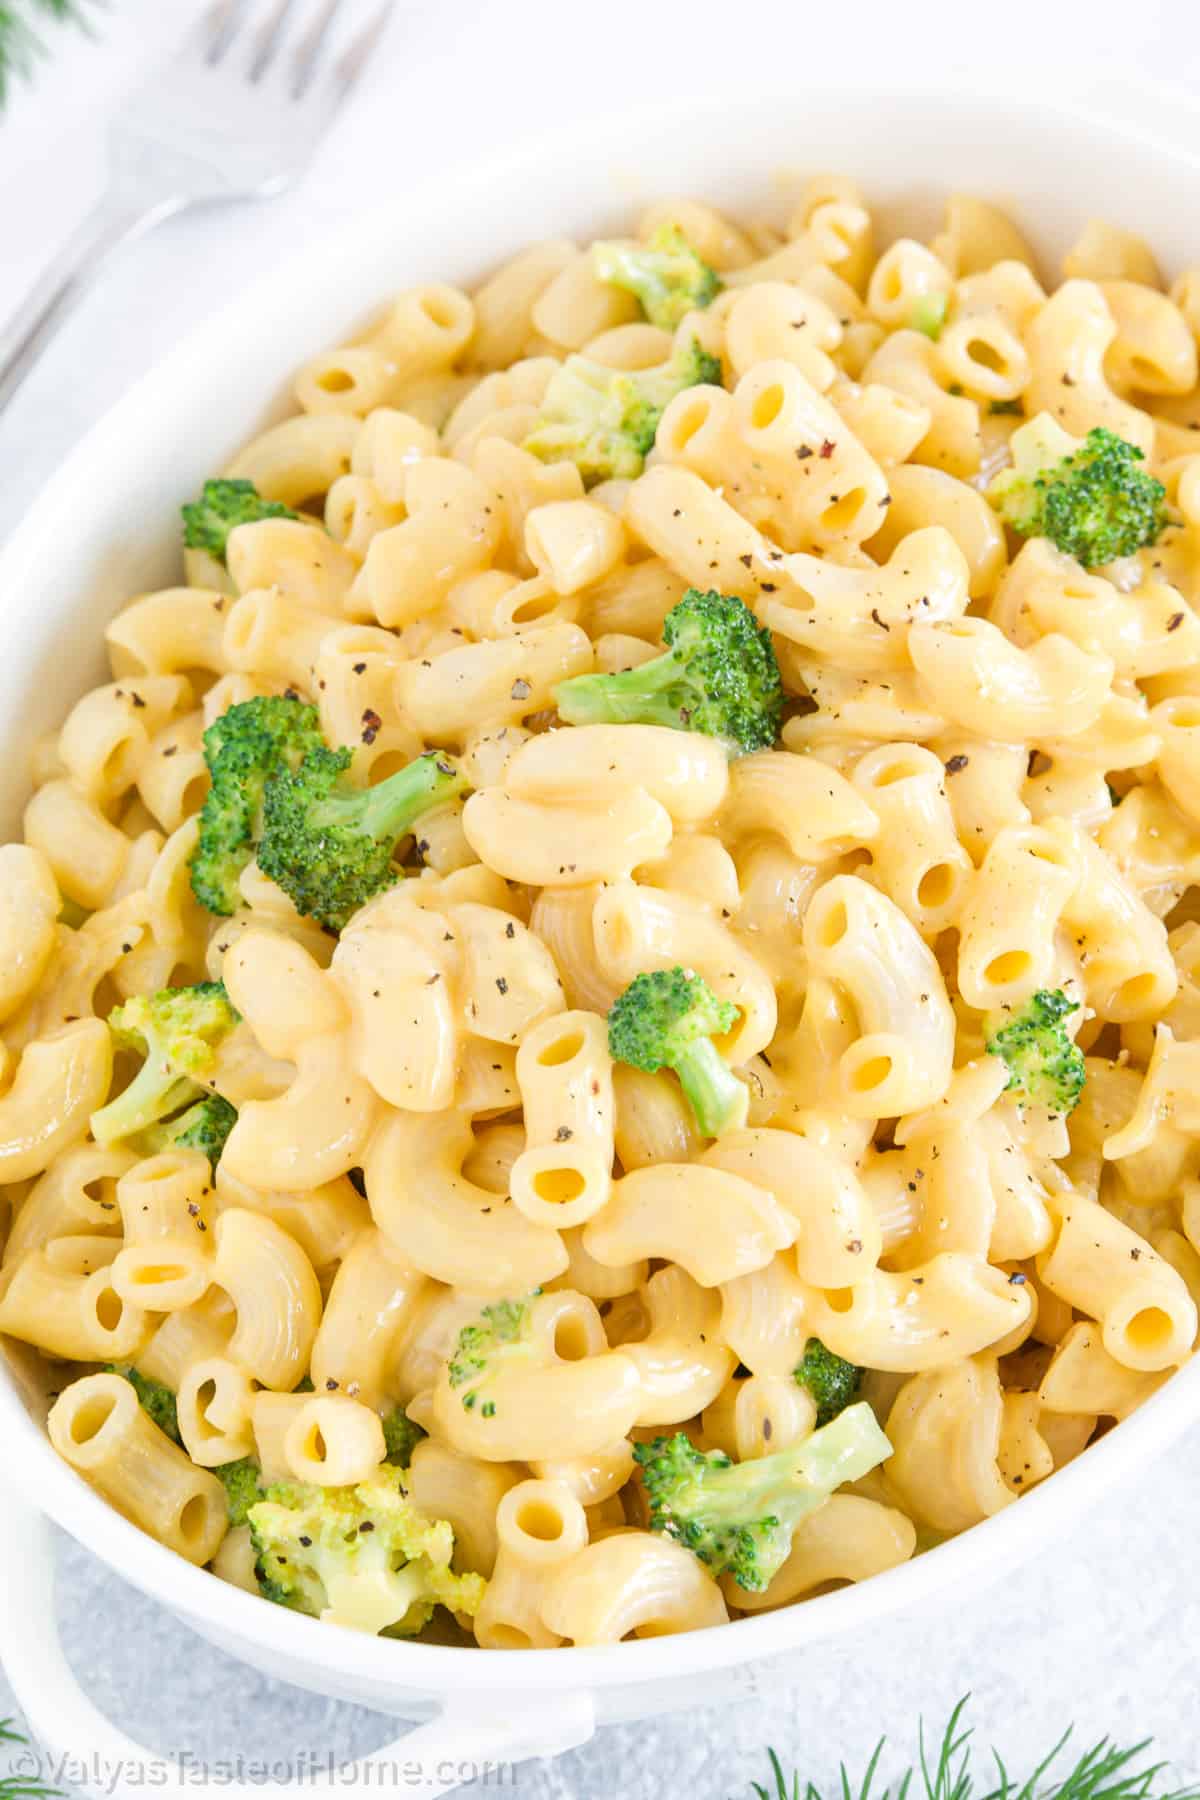 This dish pairs perfectly cooked pasta (elbows, shells, or spirals) with a creamy, rich cheese sauce and tender, vibrant broccoli florets for a result that’s as equally satisfying as it is wholesome.